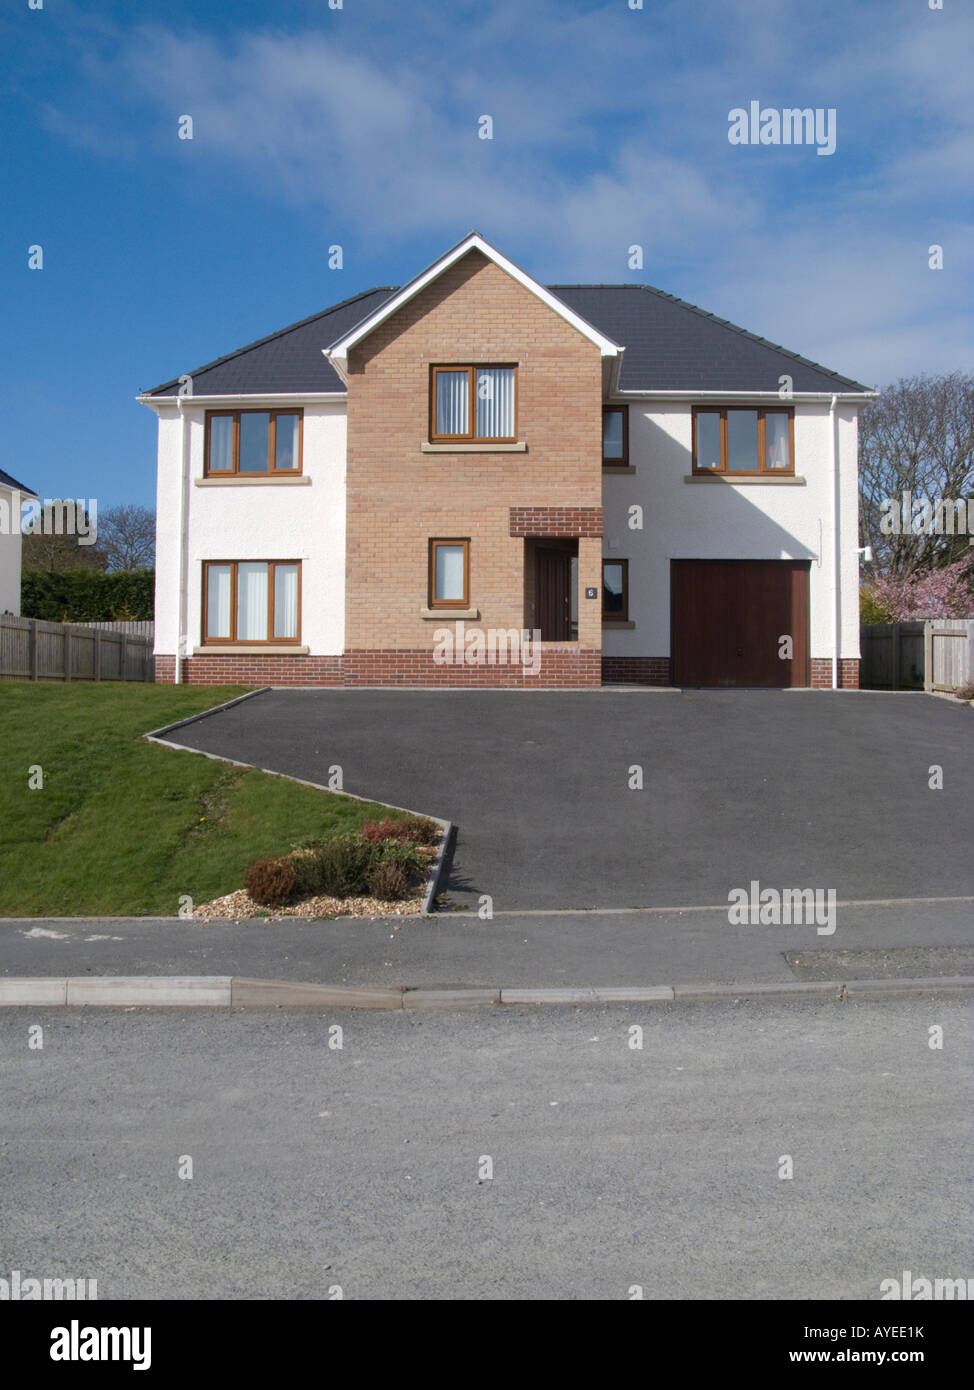 newly built detached 'Executive' home on private housing estate Aberystwyth Wales UK Stock Photo